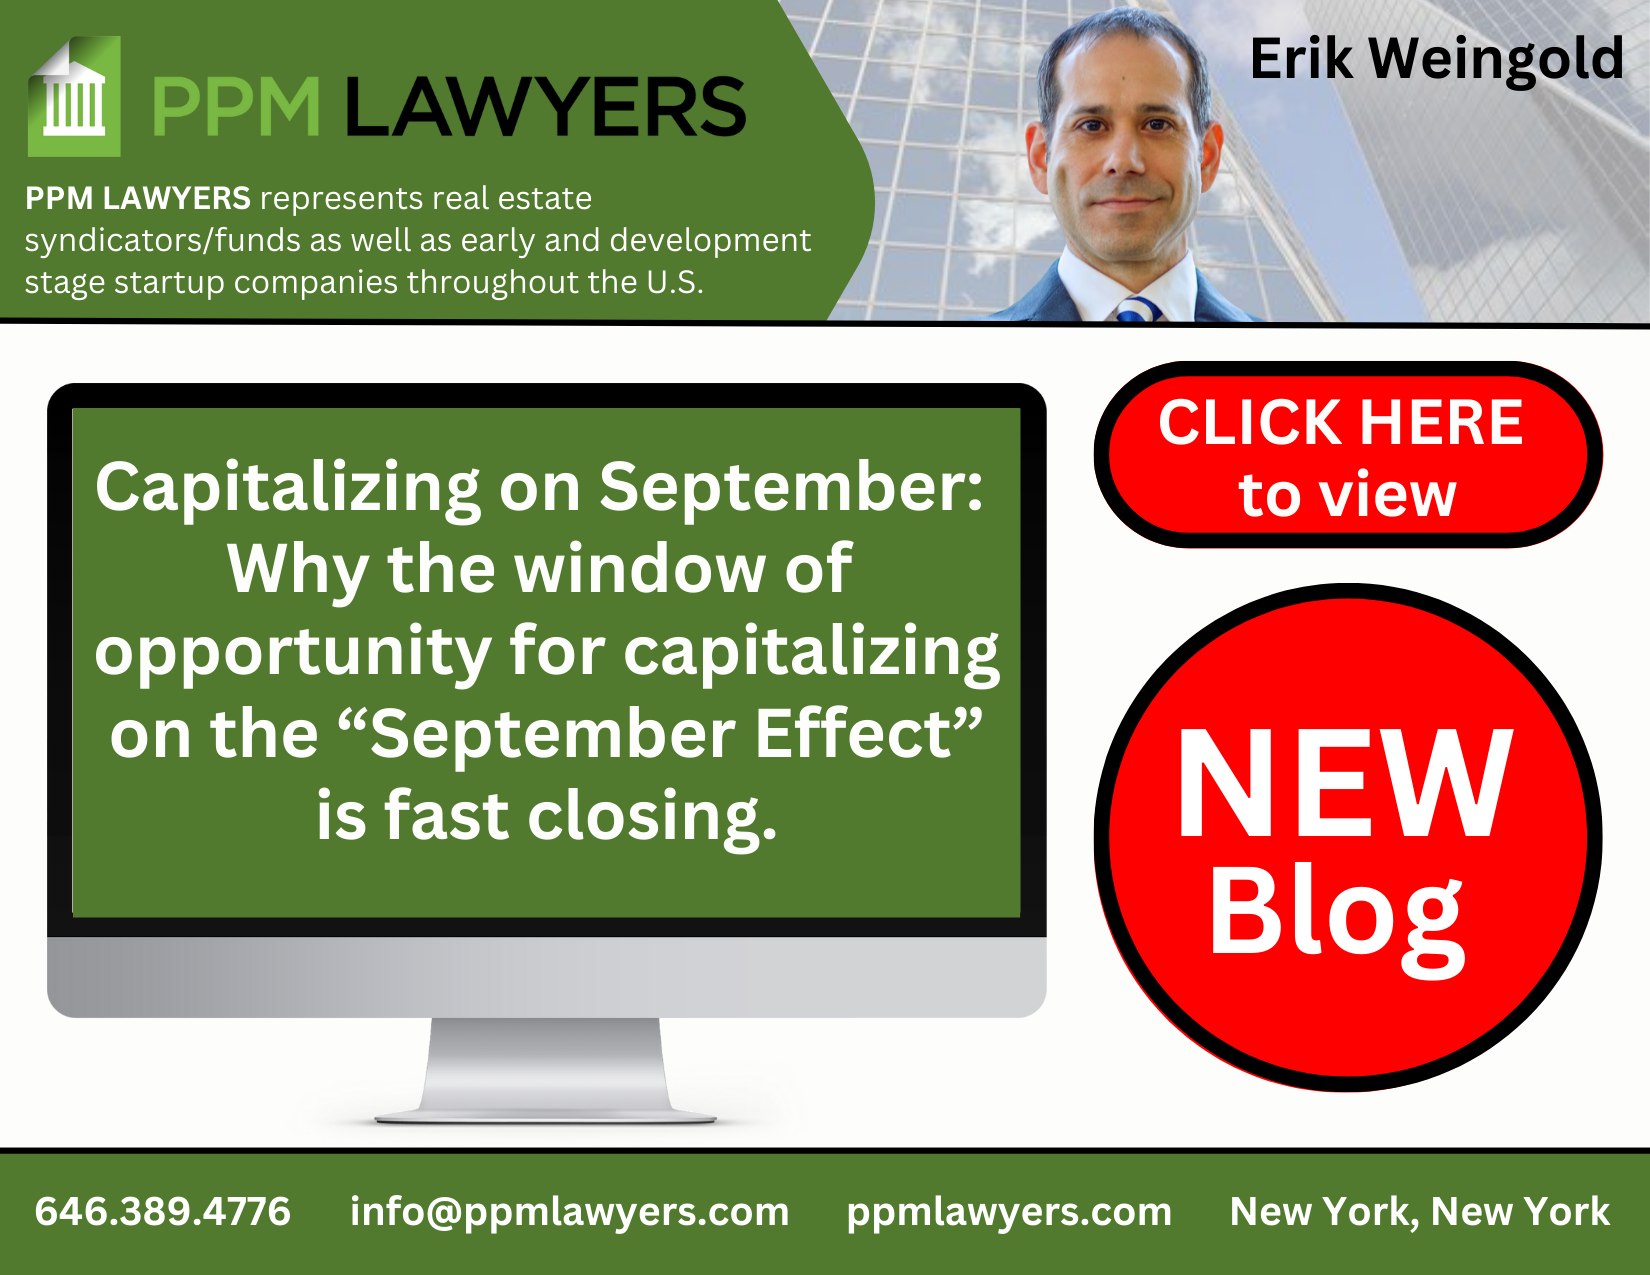 capitalizing on September: Why the window of opportunity for capitalizing on the “September Effect” is fast closing.